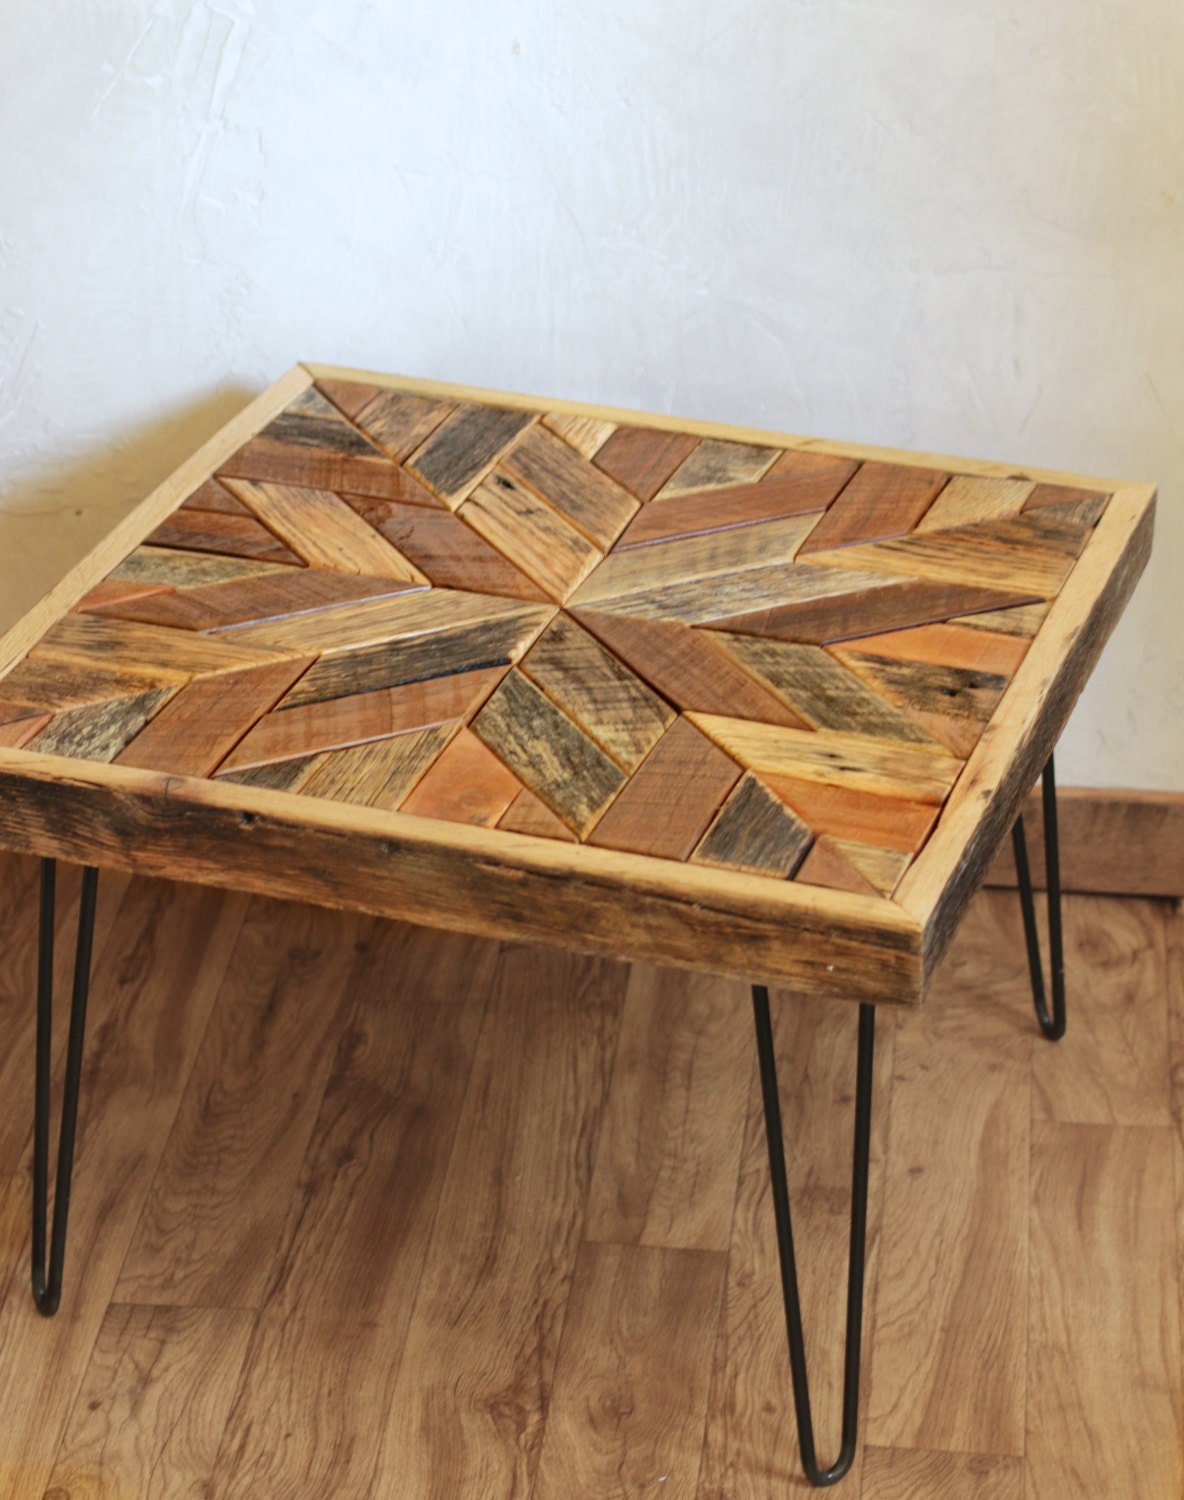 Star Pattern Coffee Table with Hairpin Legs Barn wood